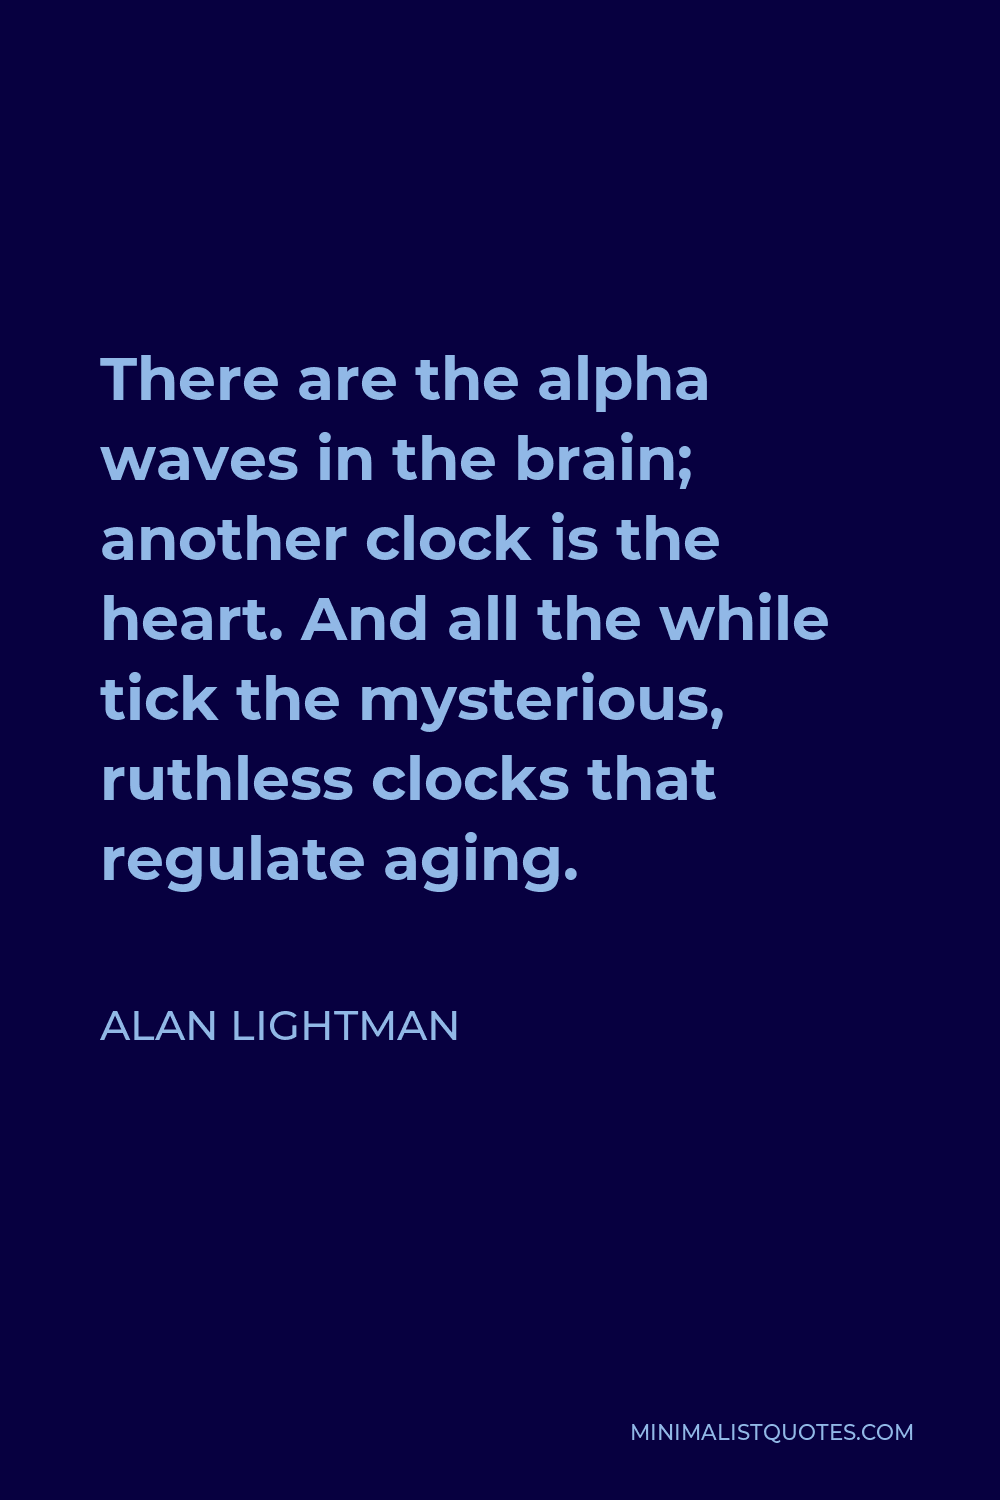 Alan Lightman Quote - There are the alpha waves in the brain; another clock is the heart. And all the while tick the mysterious, ruthless clocks that regulate aging.